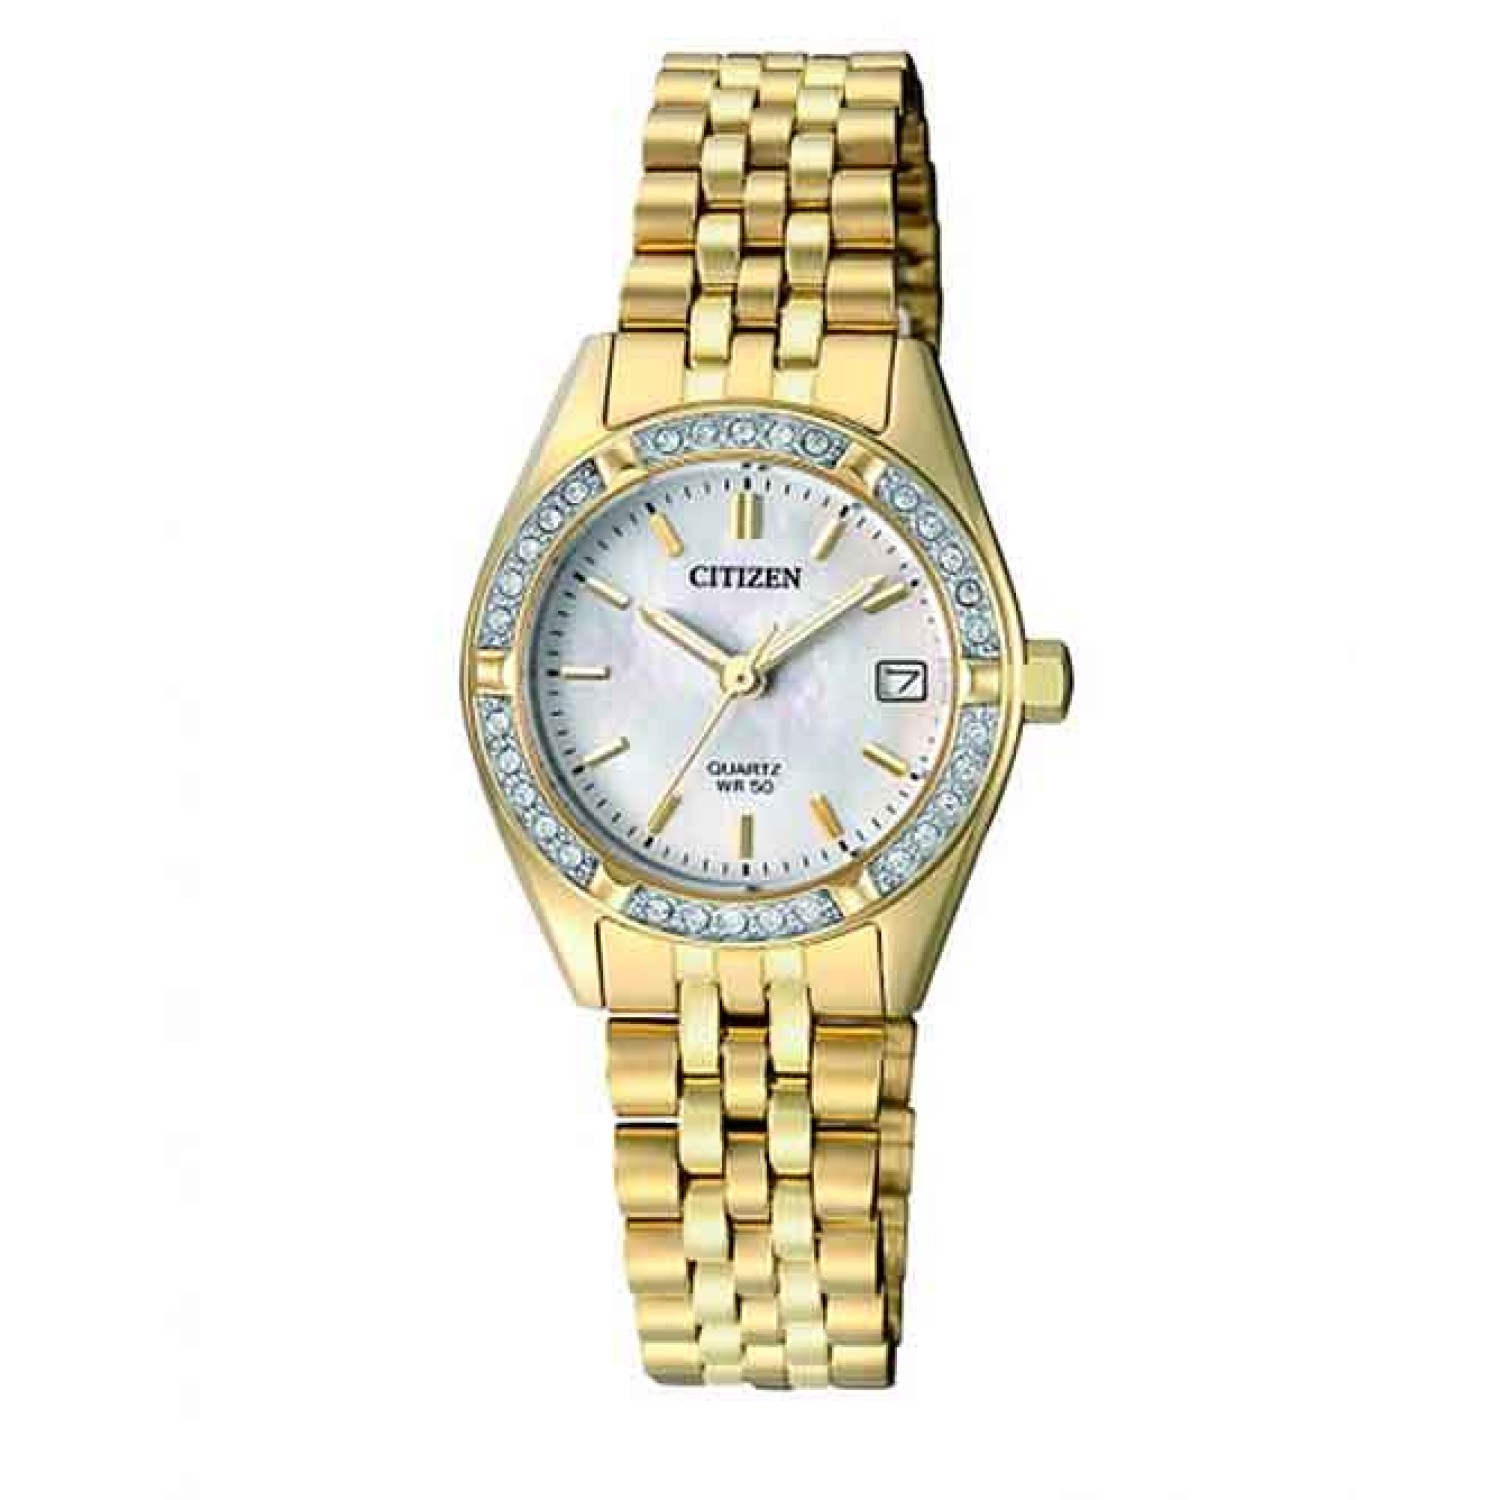 EU6062-50D Citizen. A stunning combination of Swarovski crystals and a Mother of Pearl Dial with a gold case makes this a very elegant new addition to the Citizen range Oxipay is simply the easier way to pay - use Oxipay and well spre @christies.online